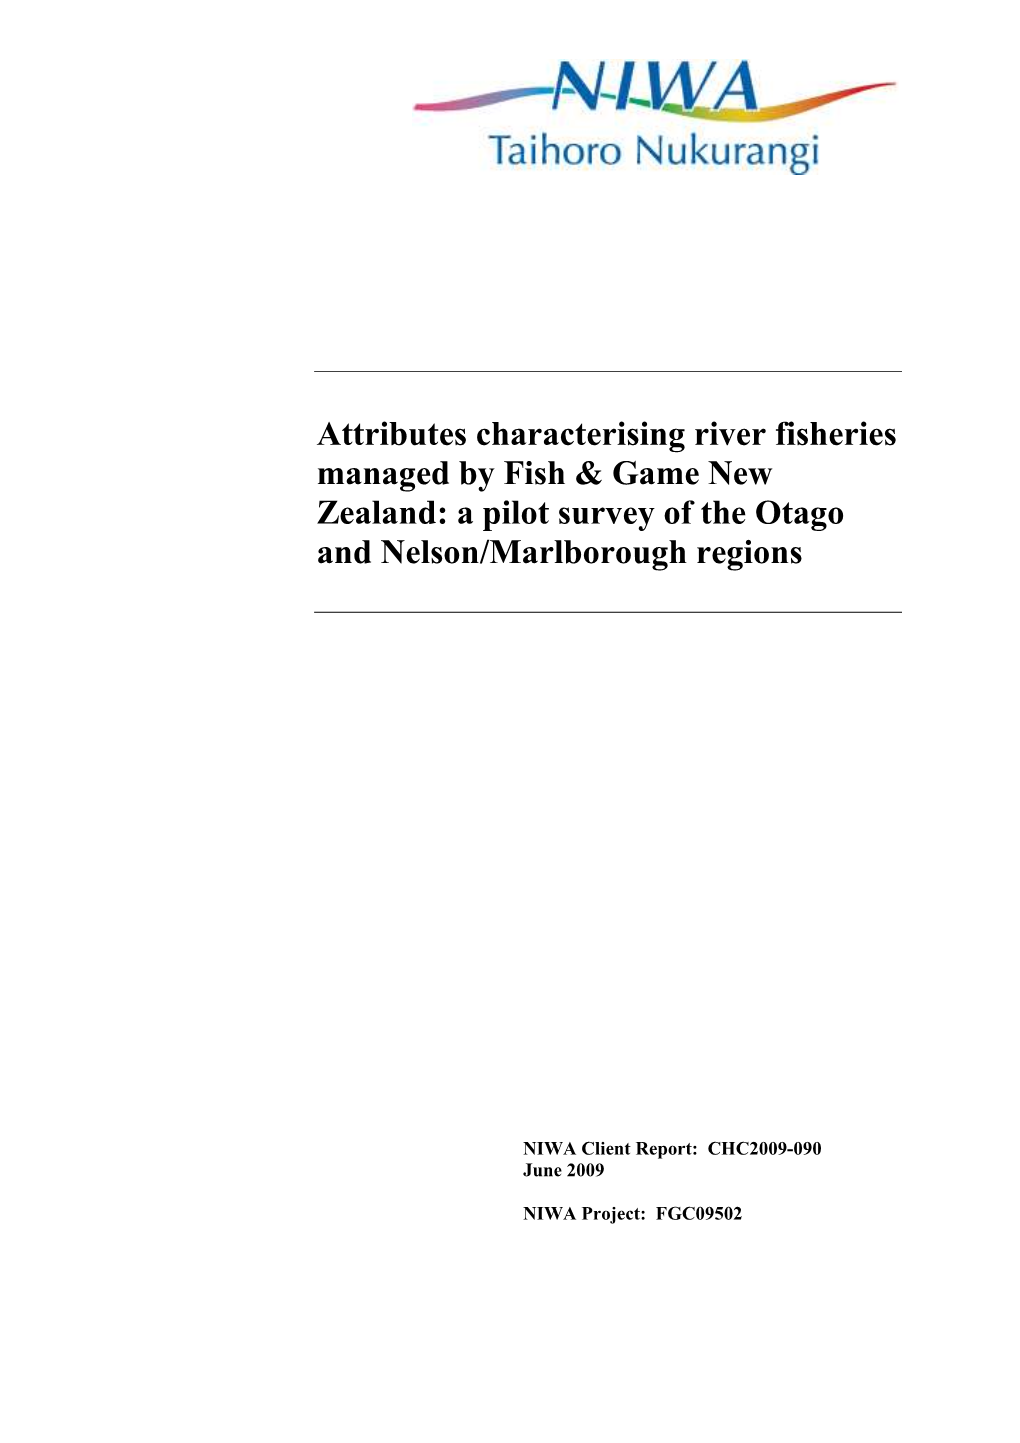 Attributes Characterising River Fisheries Managed by Fish & Game New